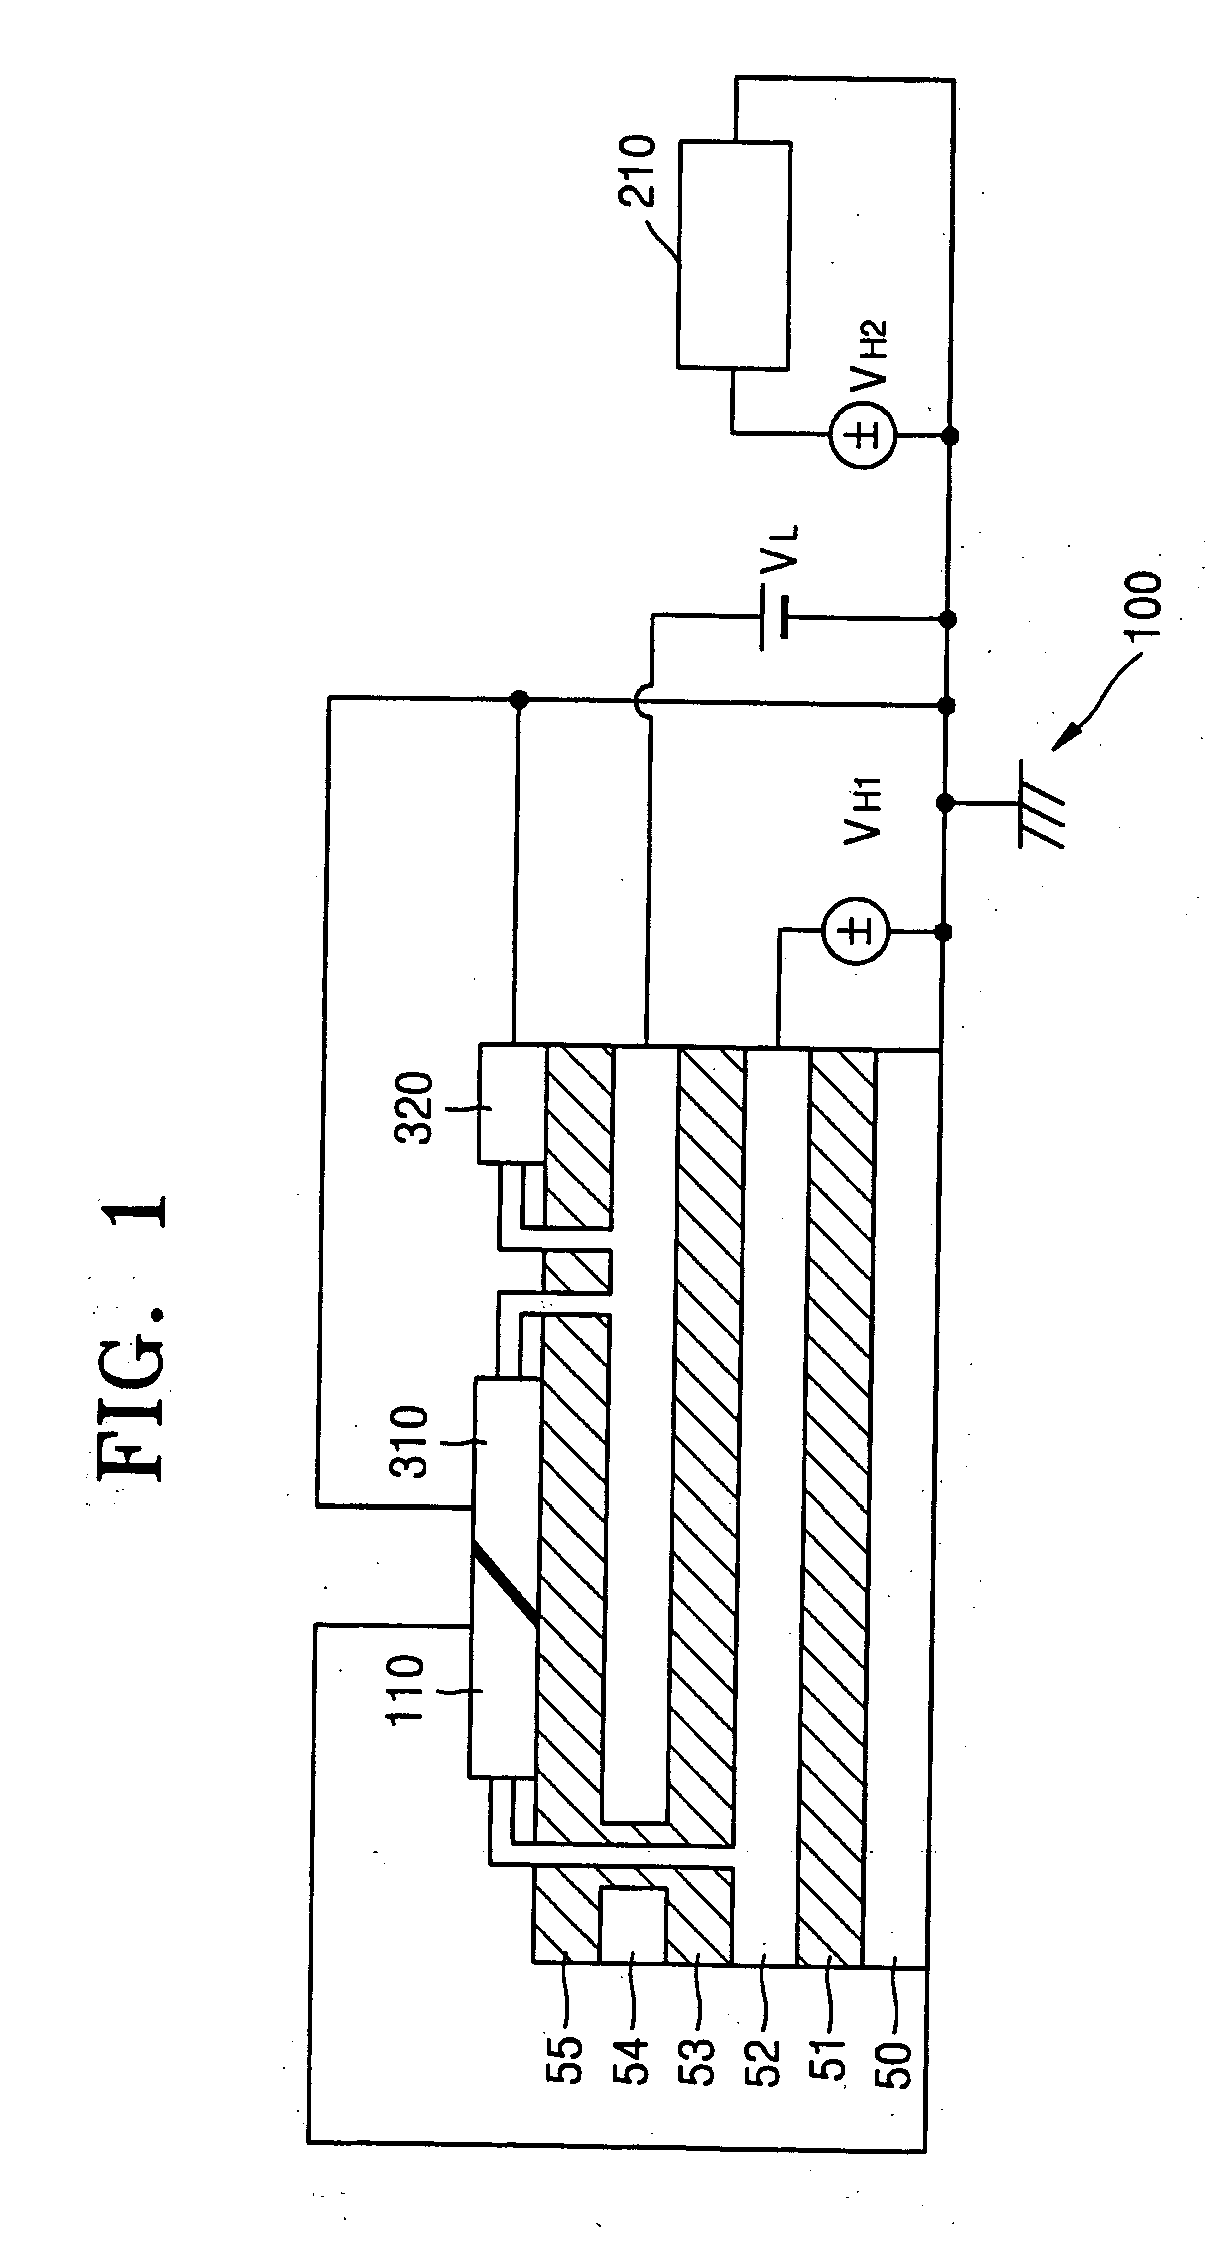 Electron emission display (EED) with separated grounds